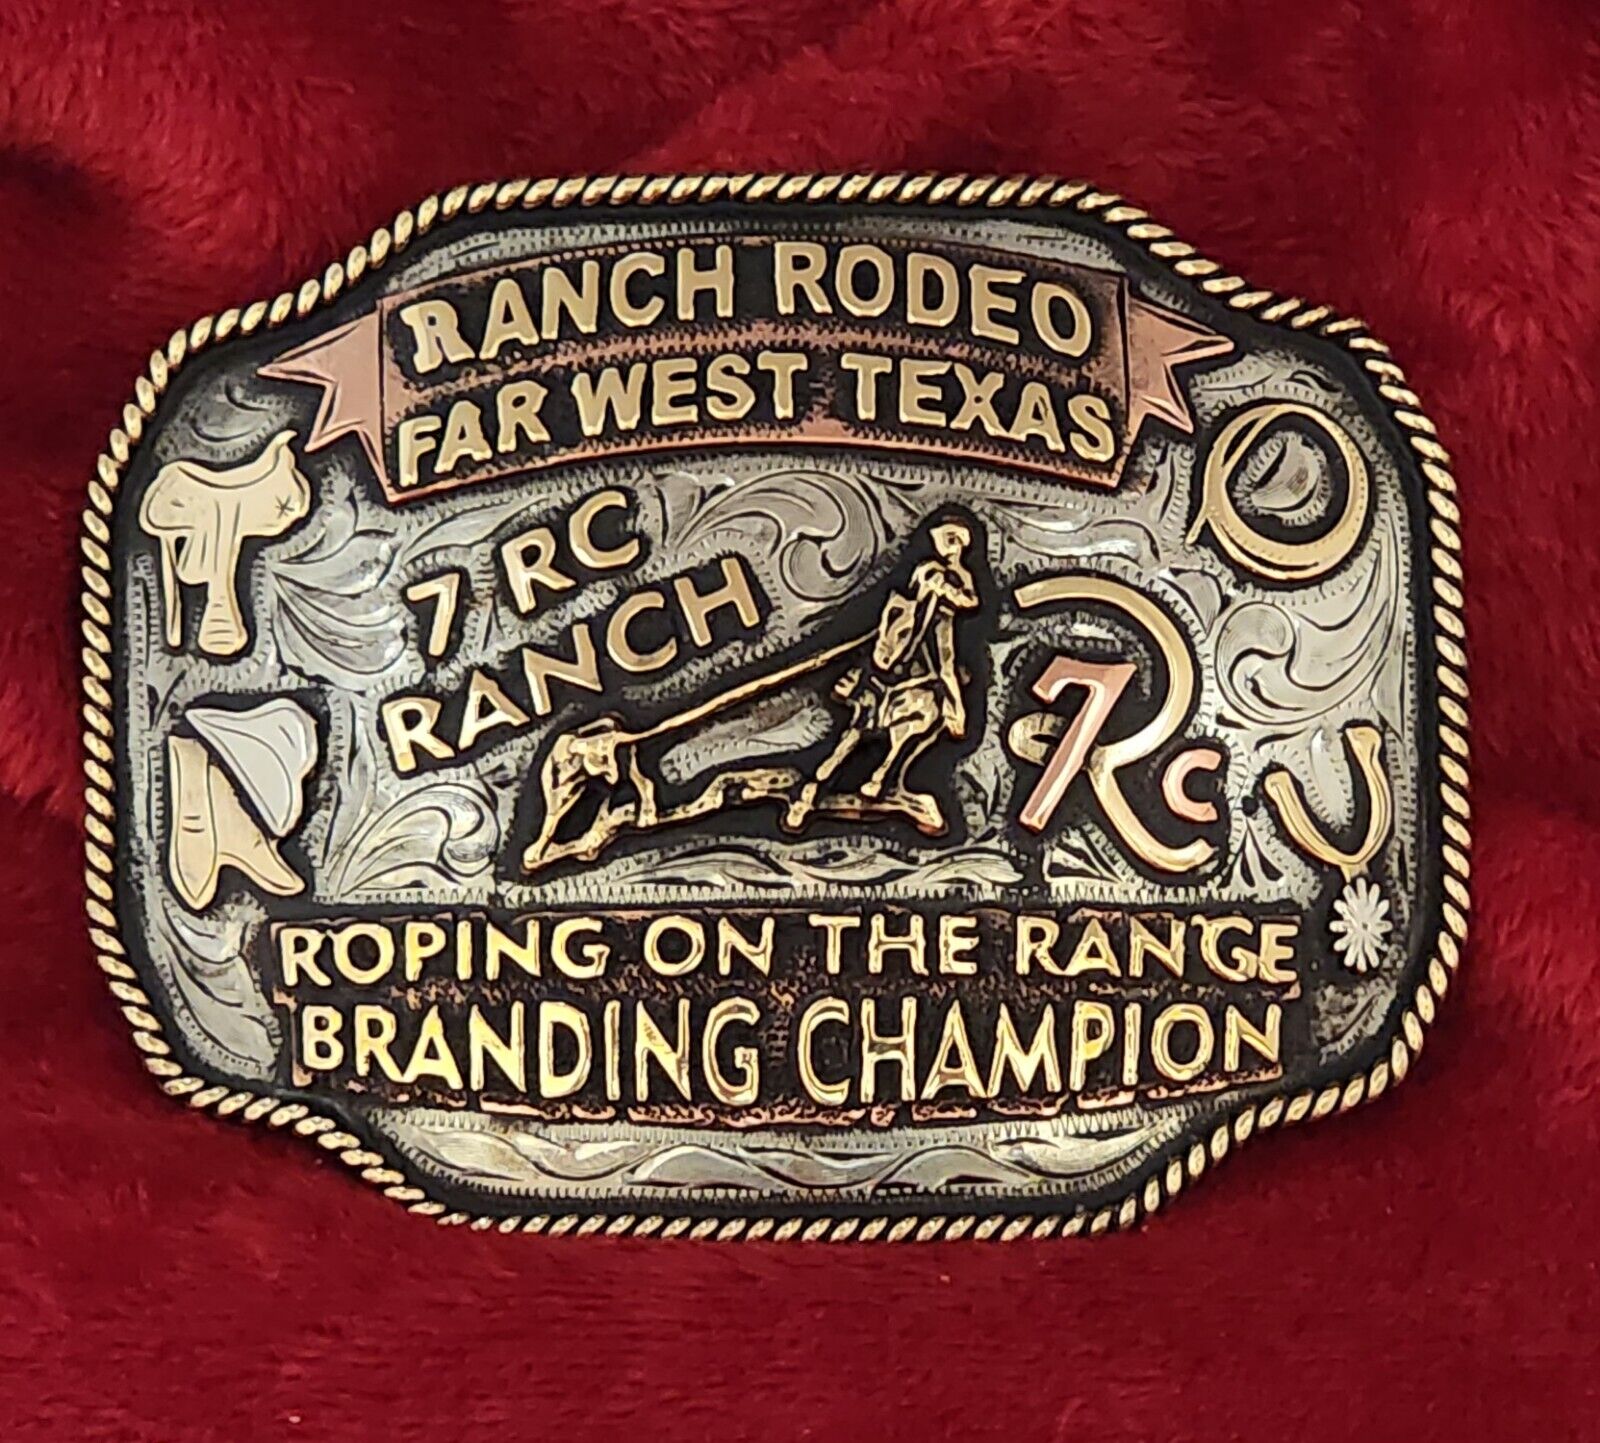 CHAMPION BUCKLE TROPHY RANCH RODEO☆PROFESSIONAL CALF ROPING☆WEST TEXAS☆RARE☆897